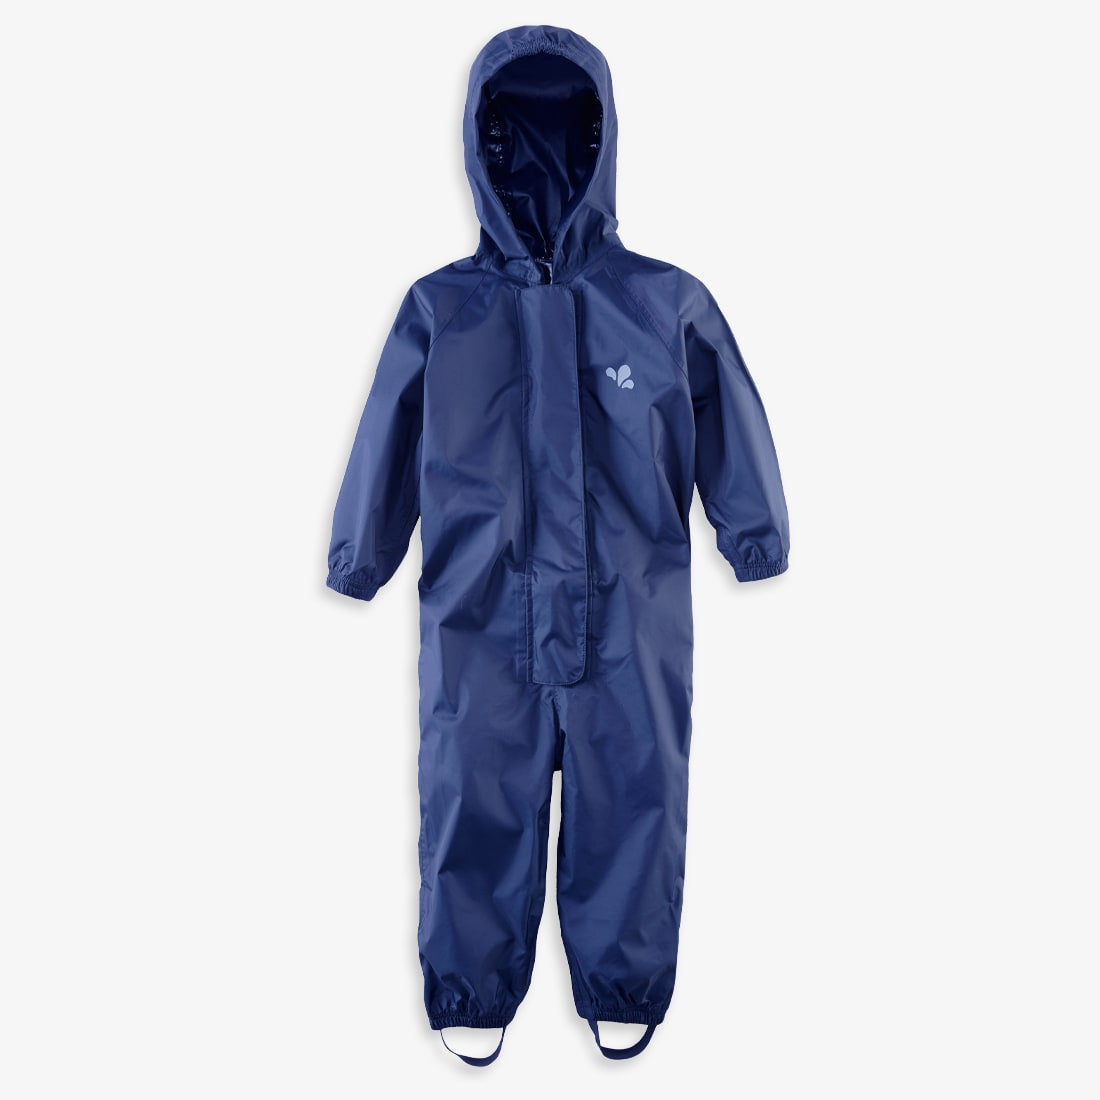 Originals Waterproof Recycled Puddle Suit Navy